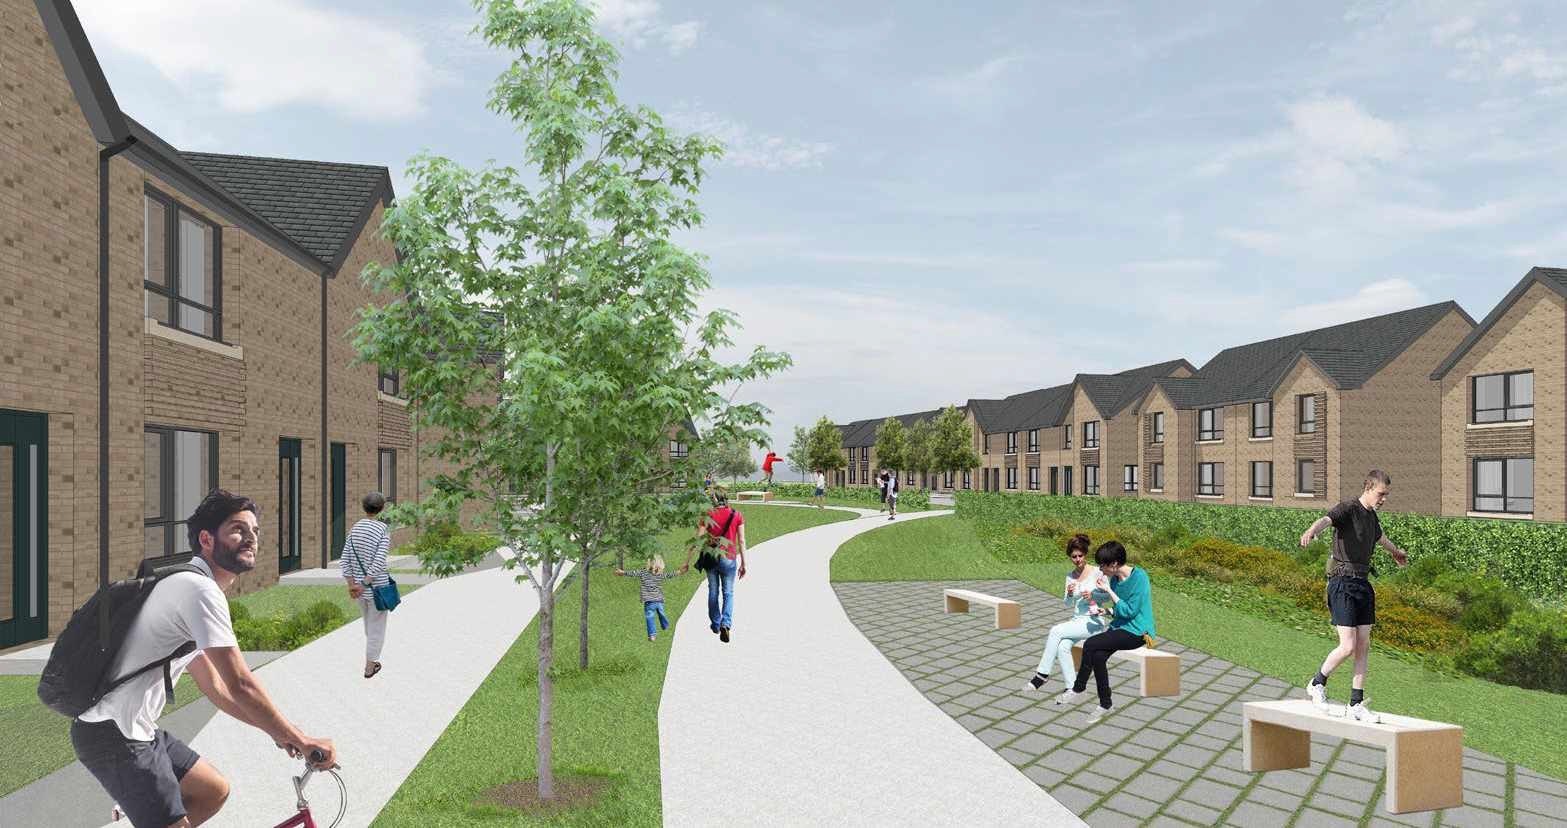 Second bid for new homes at former Tollcross bus depot site